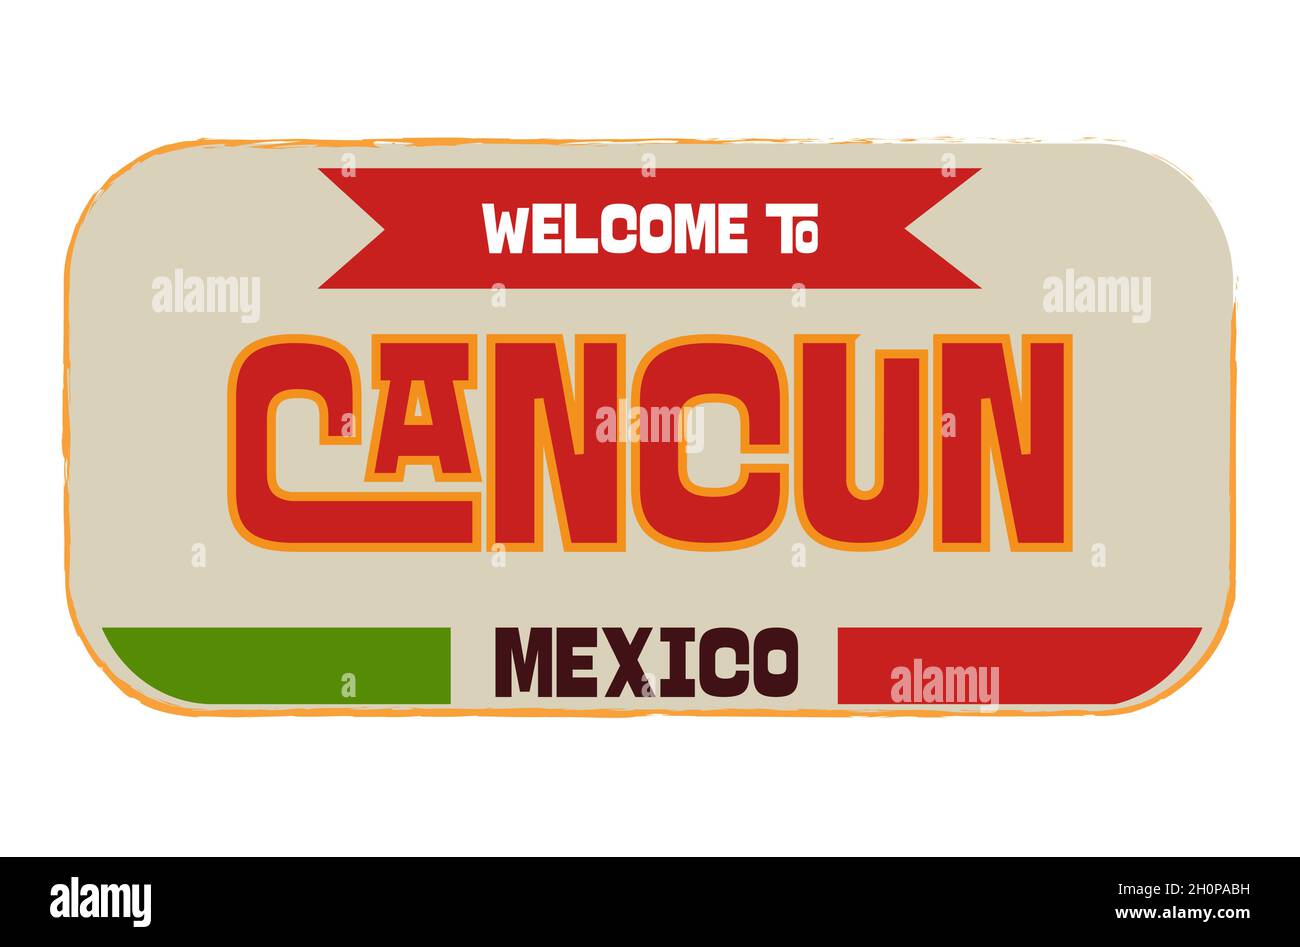 Welcome to Cancun Mexico Vector Illustration on a white background Stock Vector